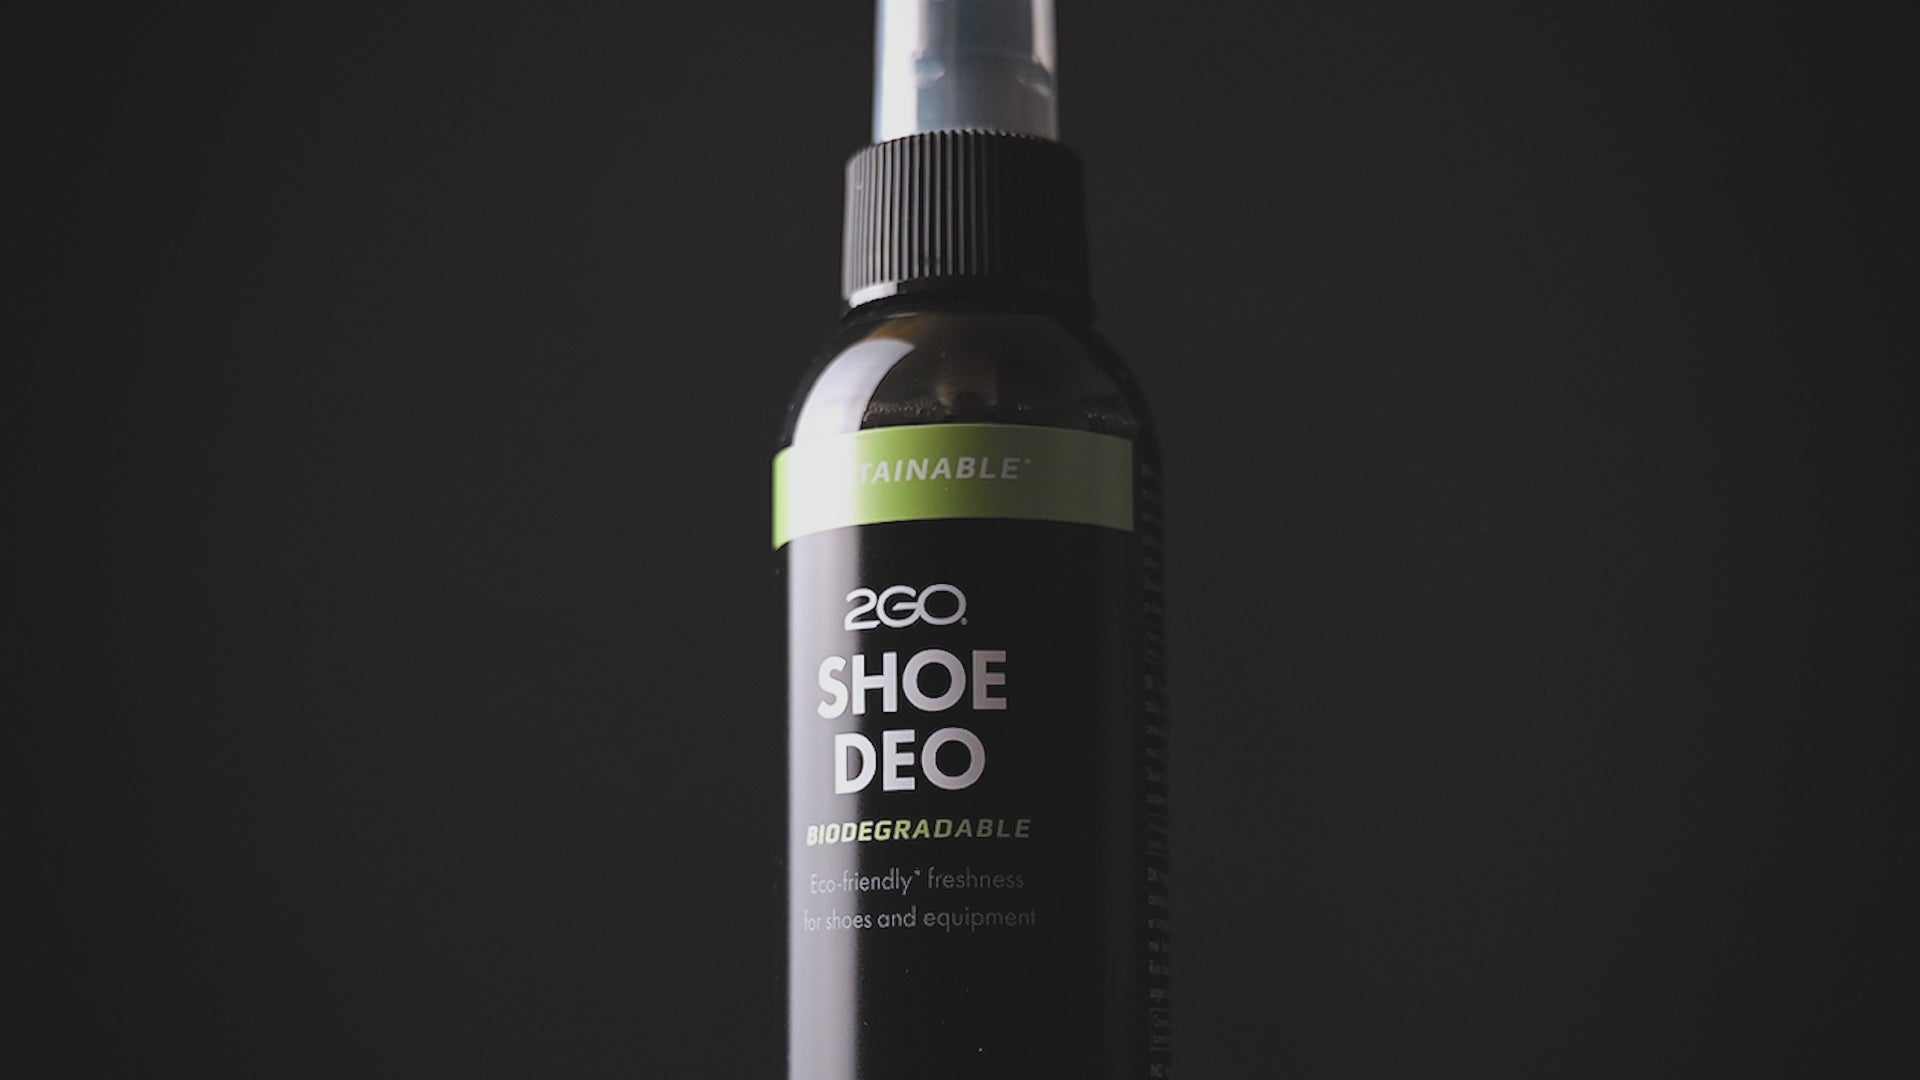 Promotional video for 2GO Shoe Deo